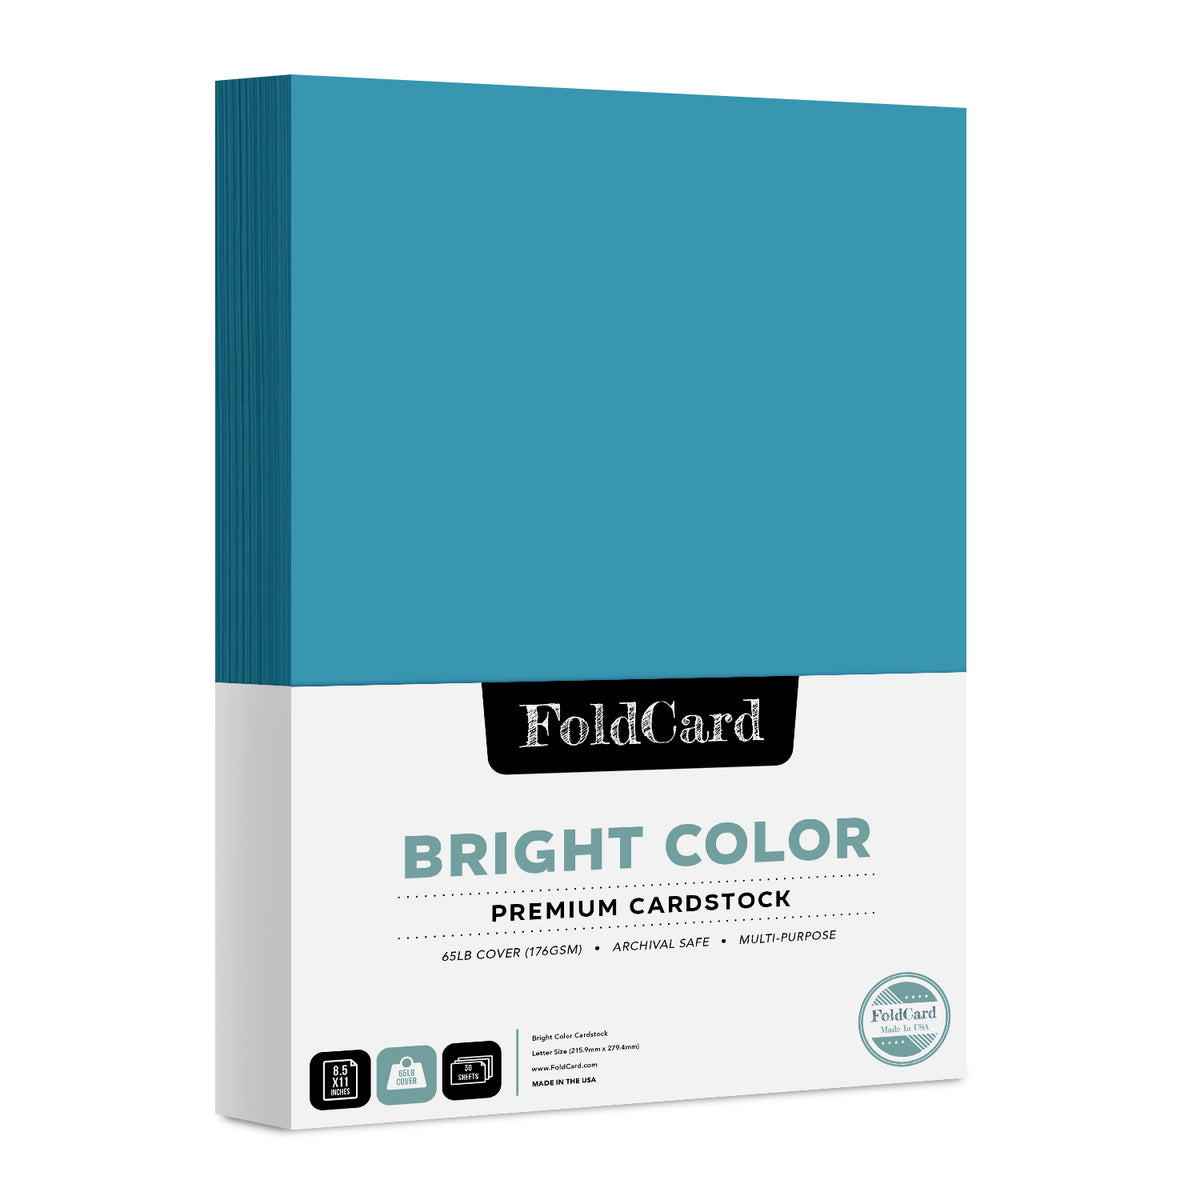 Clearance] Basis Colors - 8.5 X 11 Cardstock Paper - Light Blue